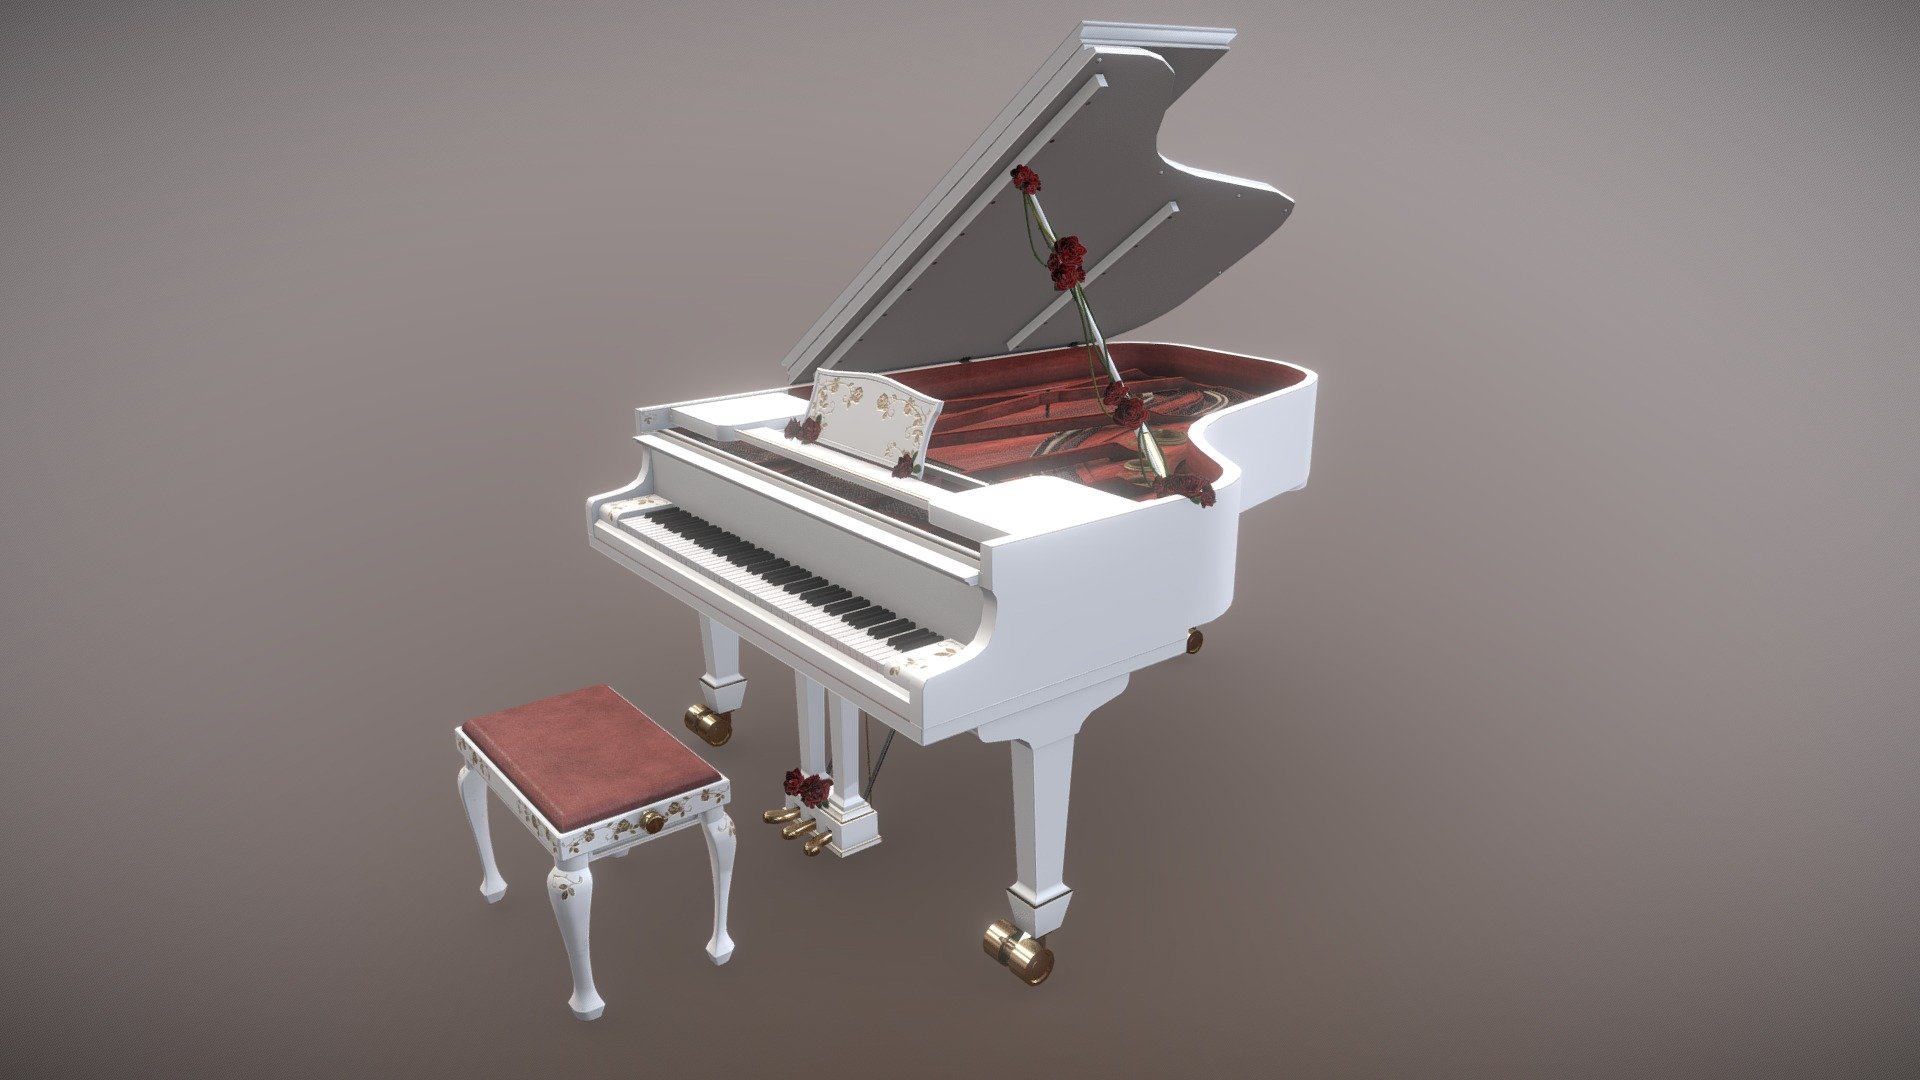 .I made this as a study and to model something detailed. I have made a full-sized grand piano with a fully modeled keyboard, pedals and underside. I have made it as accurate as possible, and I've used several references online to get the different parts right (since I don't have any access to a grand piano, sadly enough). I wanted to make a white grand piano since I think they're very extra and cool, and I thought that a red inside would look dramatic, so I made it red inside. The roses I made just because.

To stay with the roses-theme I decided to decorate the piano and the chair with a rose pattern, so I drew a quick alpha base for a rose pattern I could use and used it when I textured it.

Modeled in Maya, textured in Substance Painter, rendered in Unreal Engine 3d model